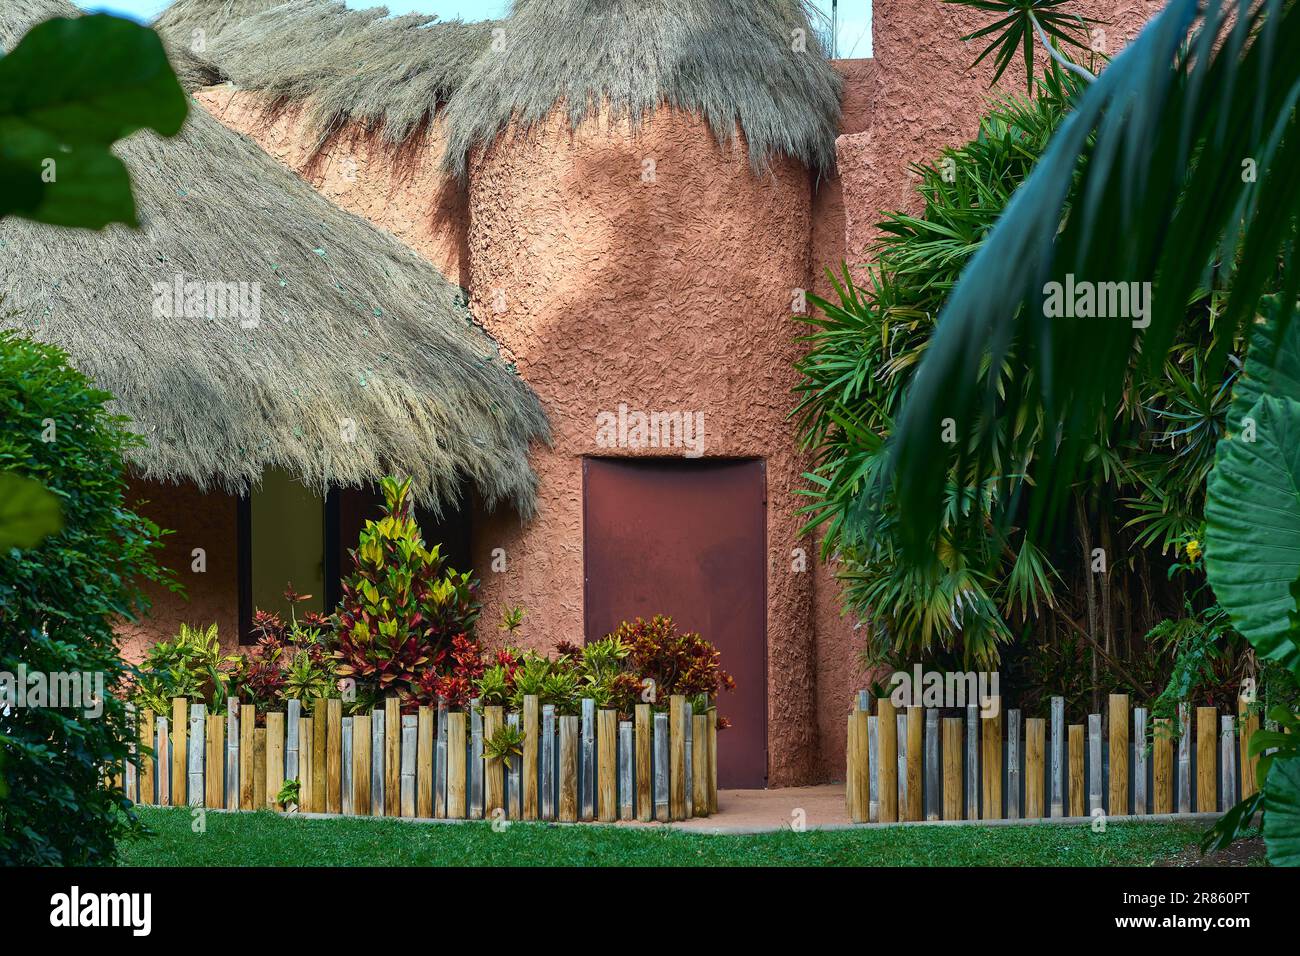 Mud house with a thatched roof and a beautiful garden. Stock Photo